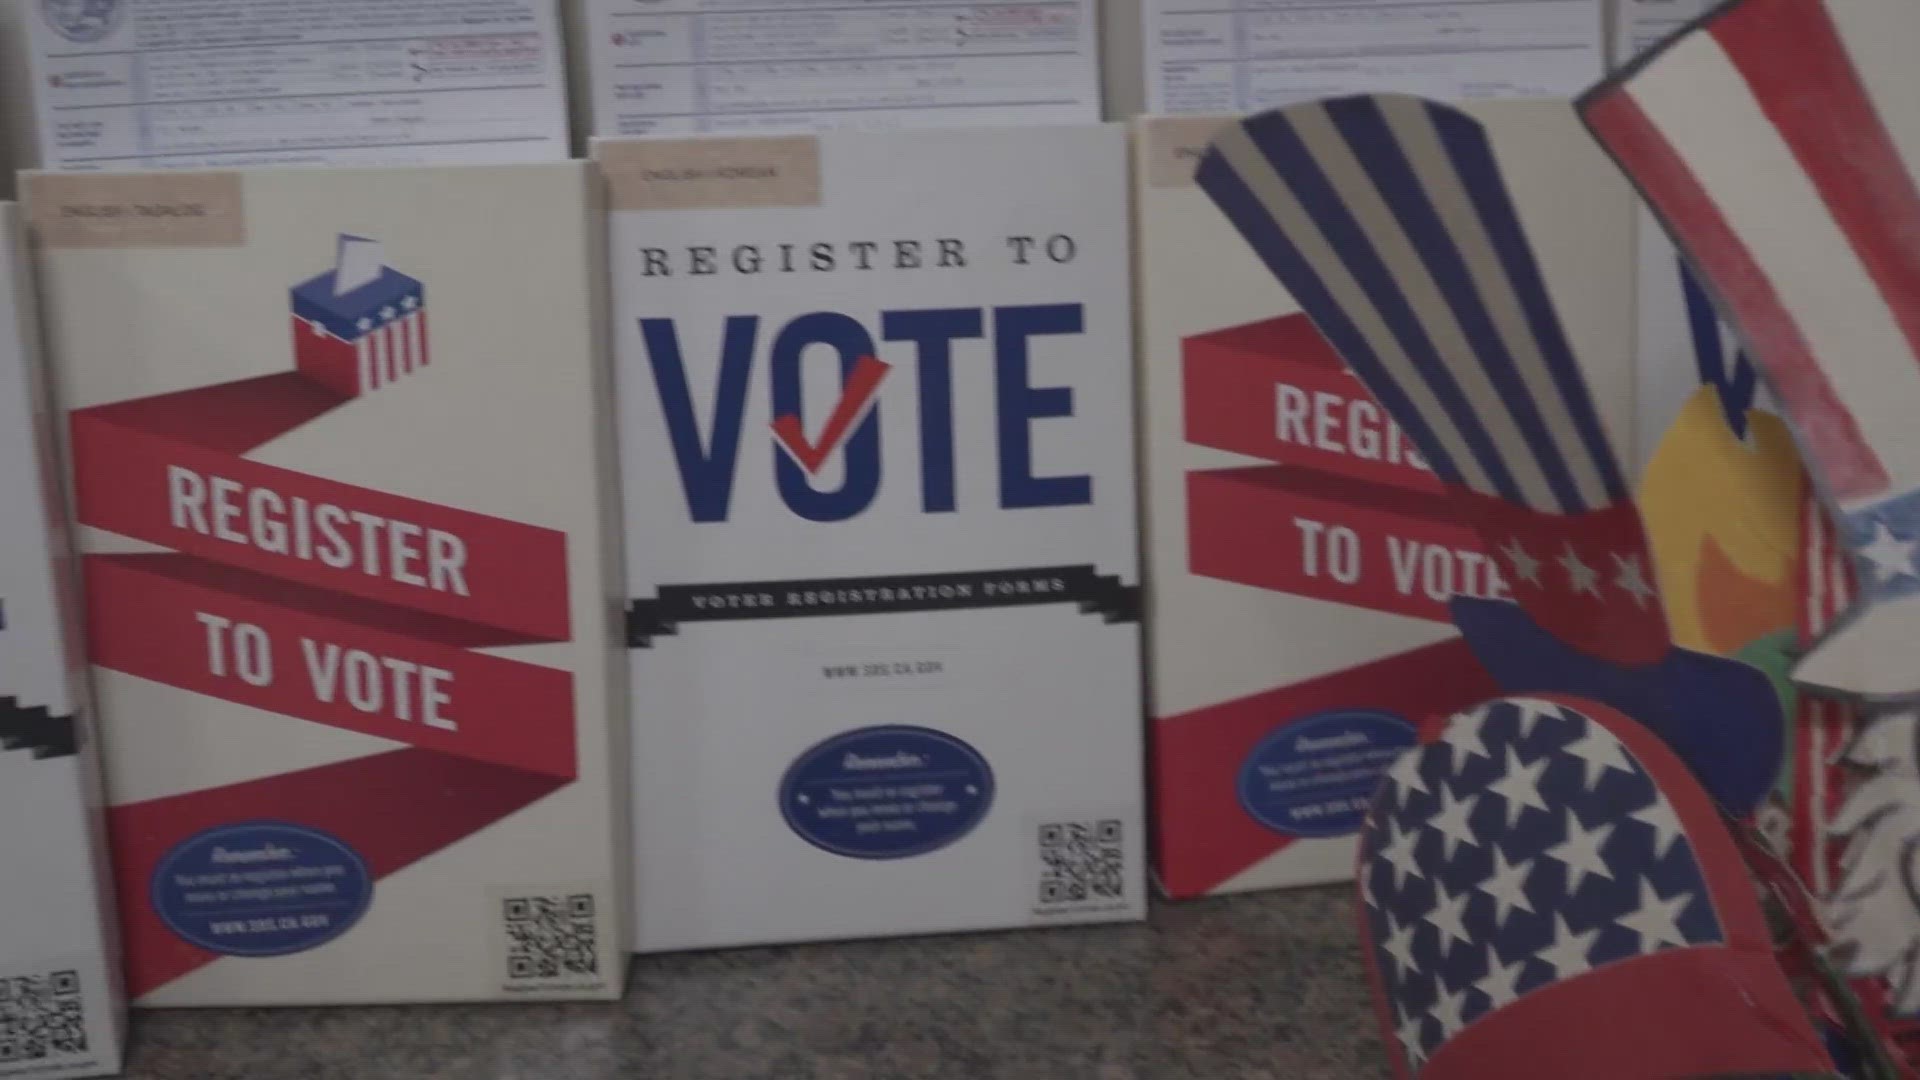 The San Joaquin County Registrar of Voters is beefing up existing measures and added a new security measure after a recent voter fraud case.